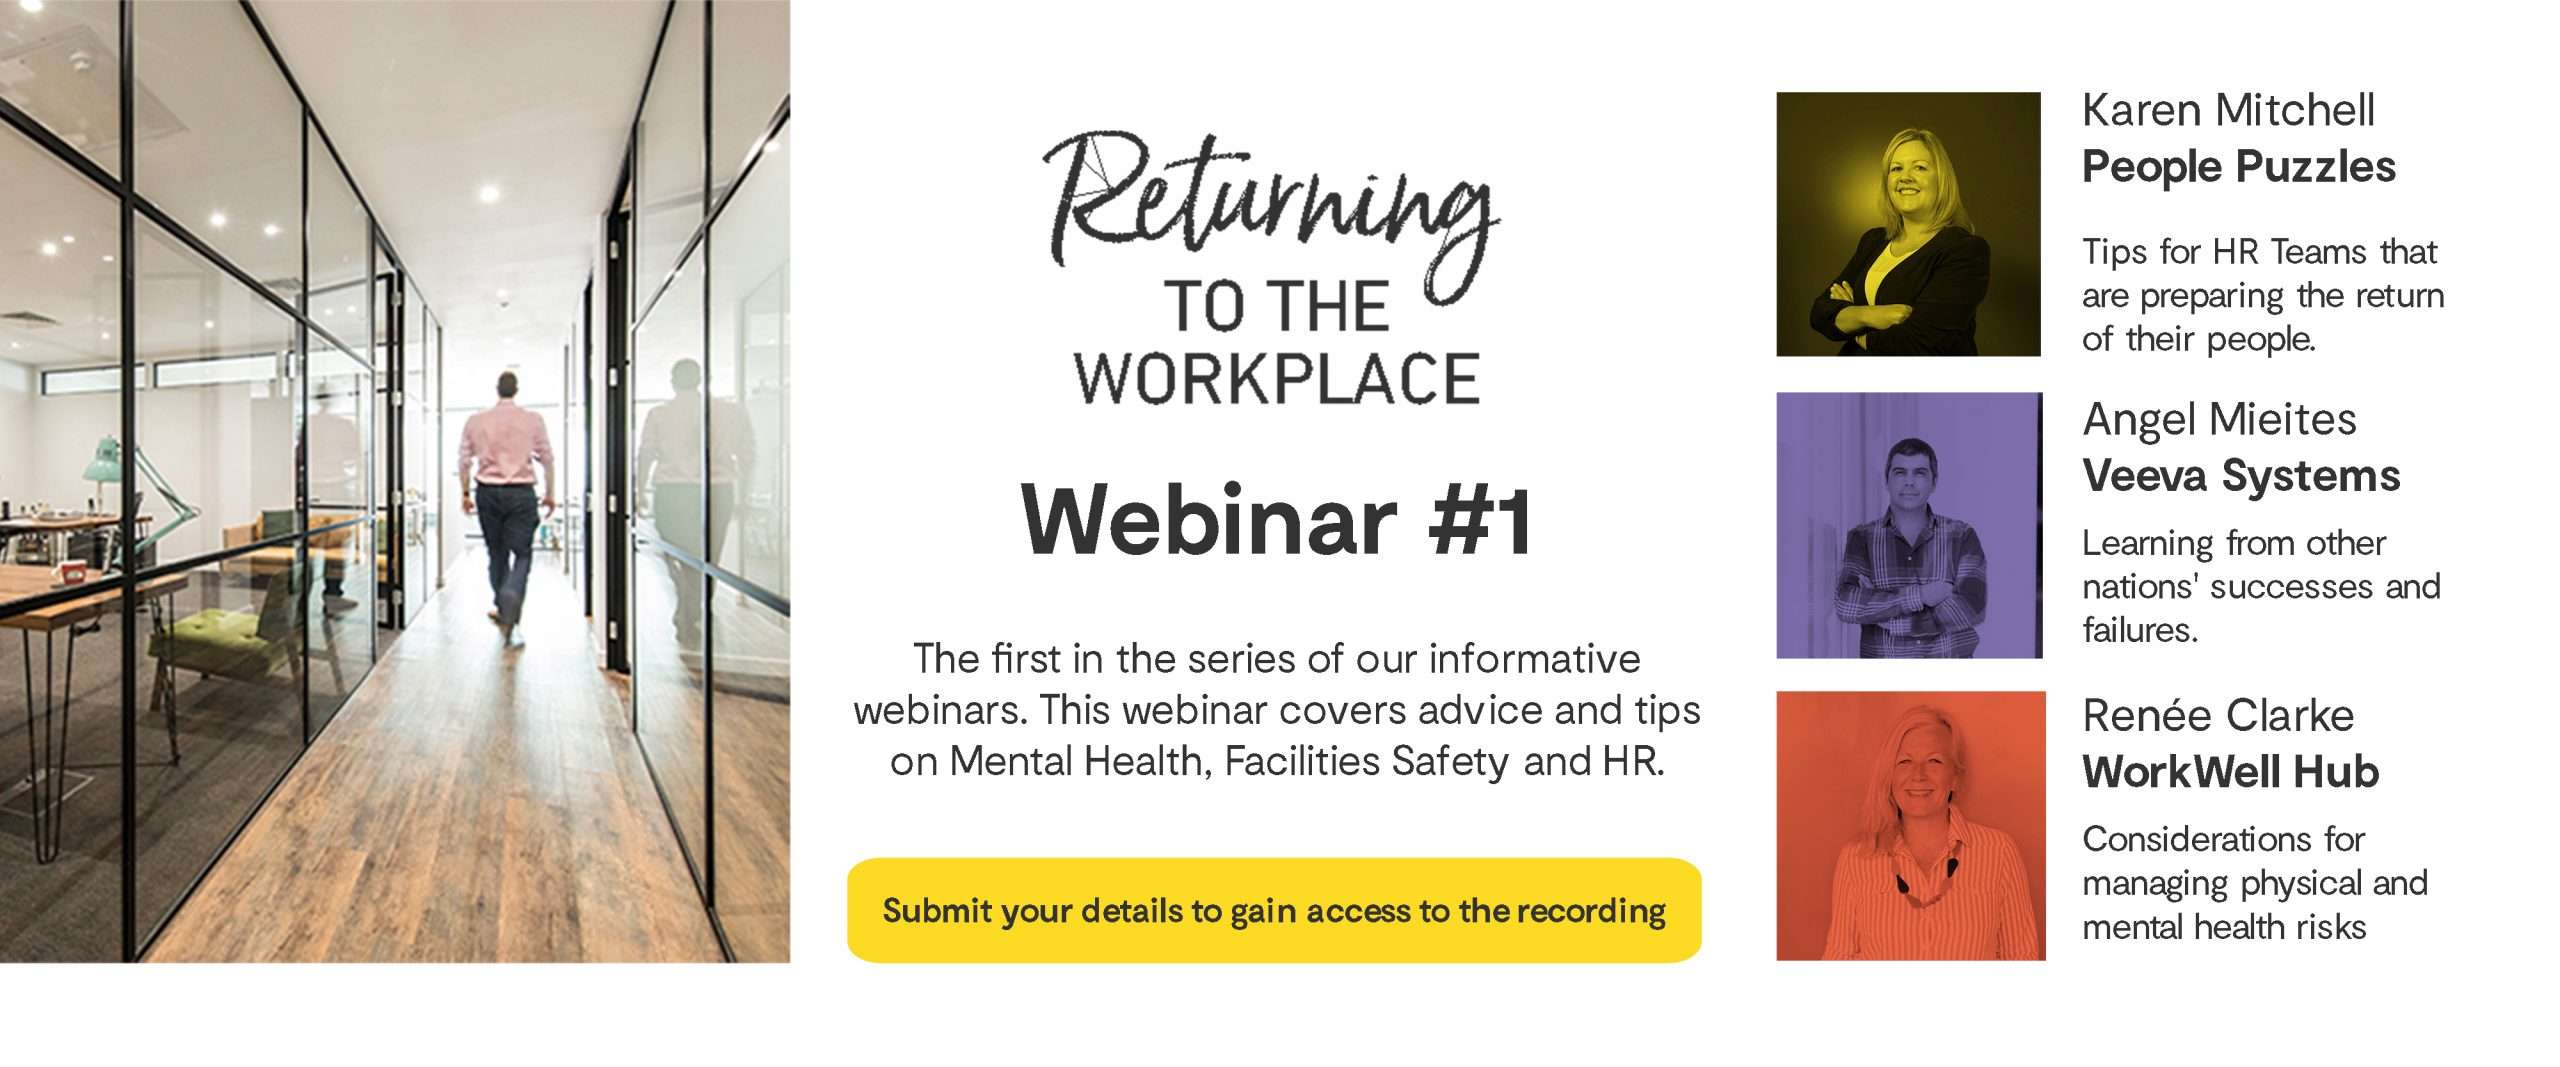 Returning To The Workplace Webinar #1 – 12:30 GMT Friday 24th April 2020